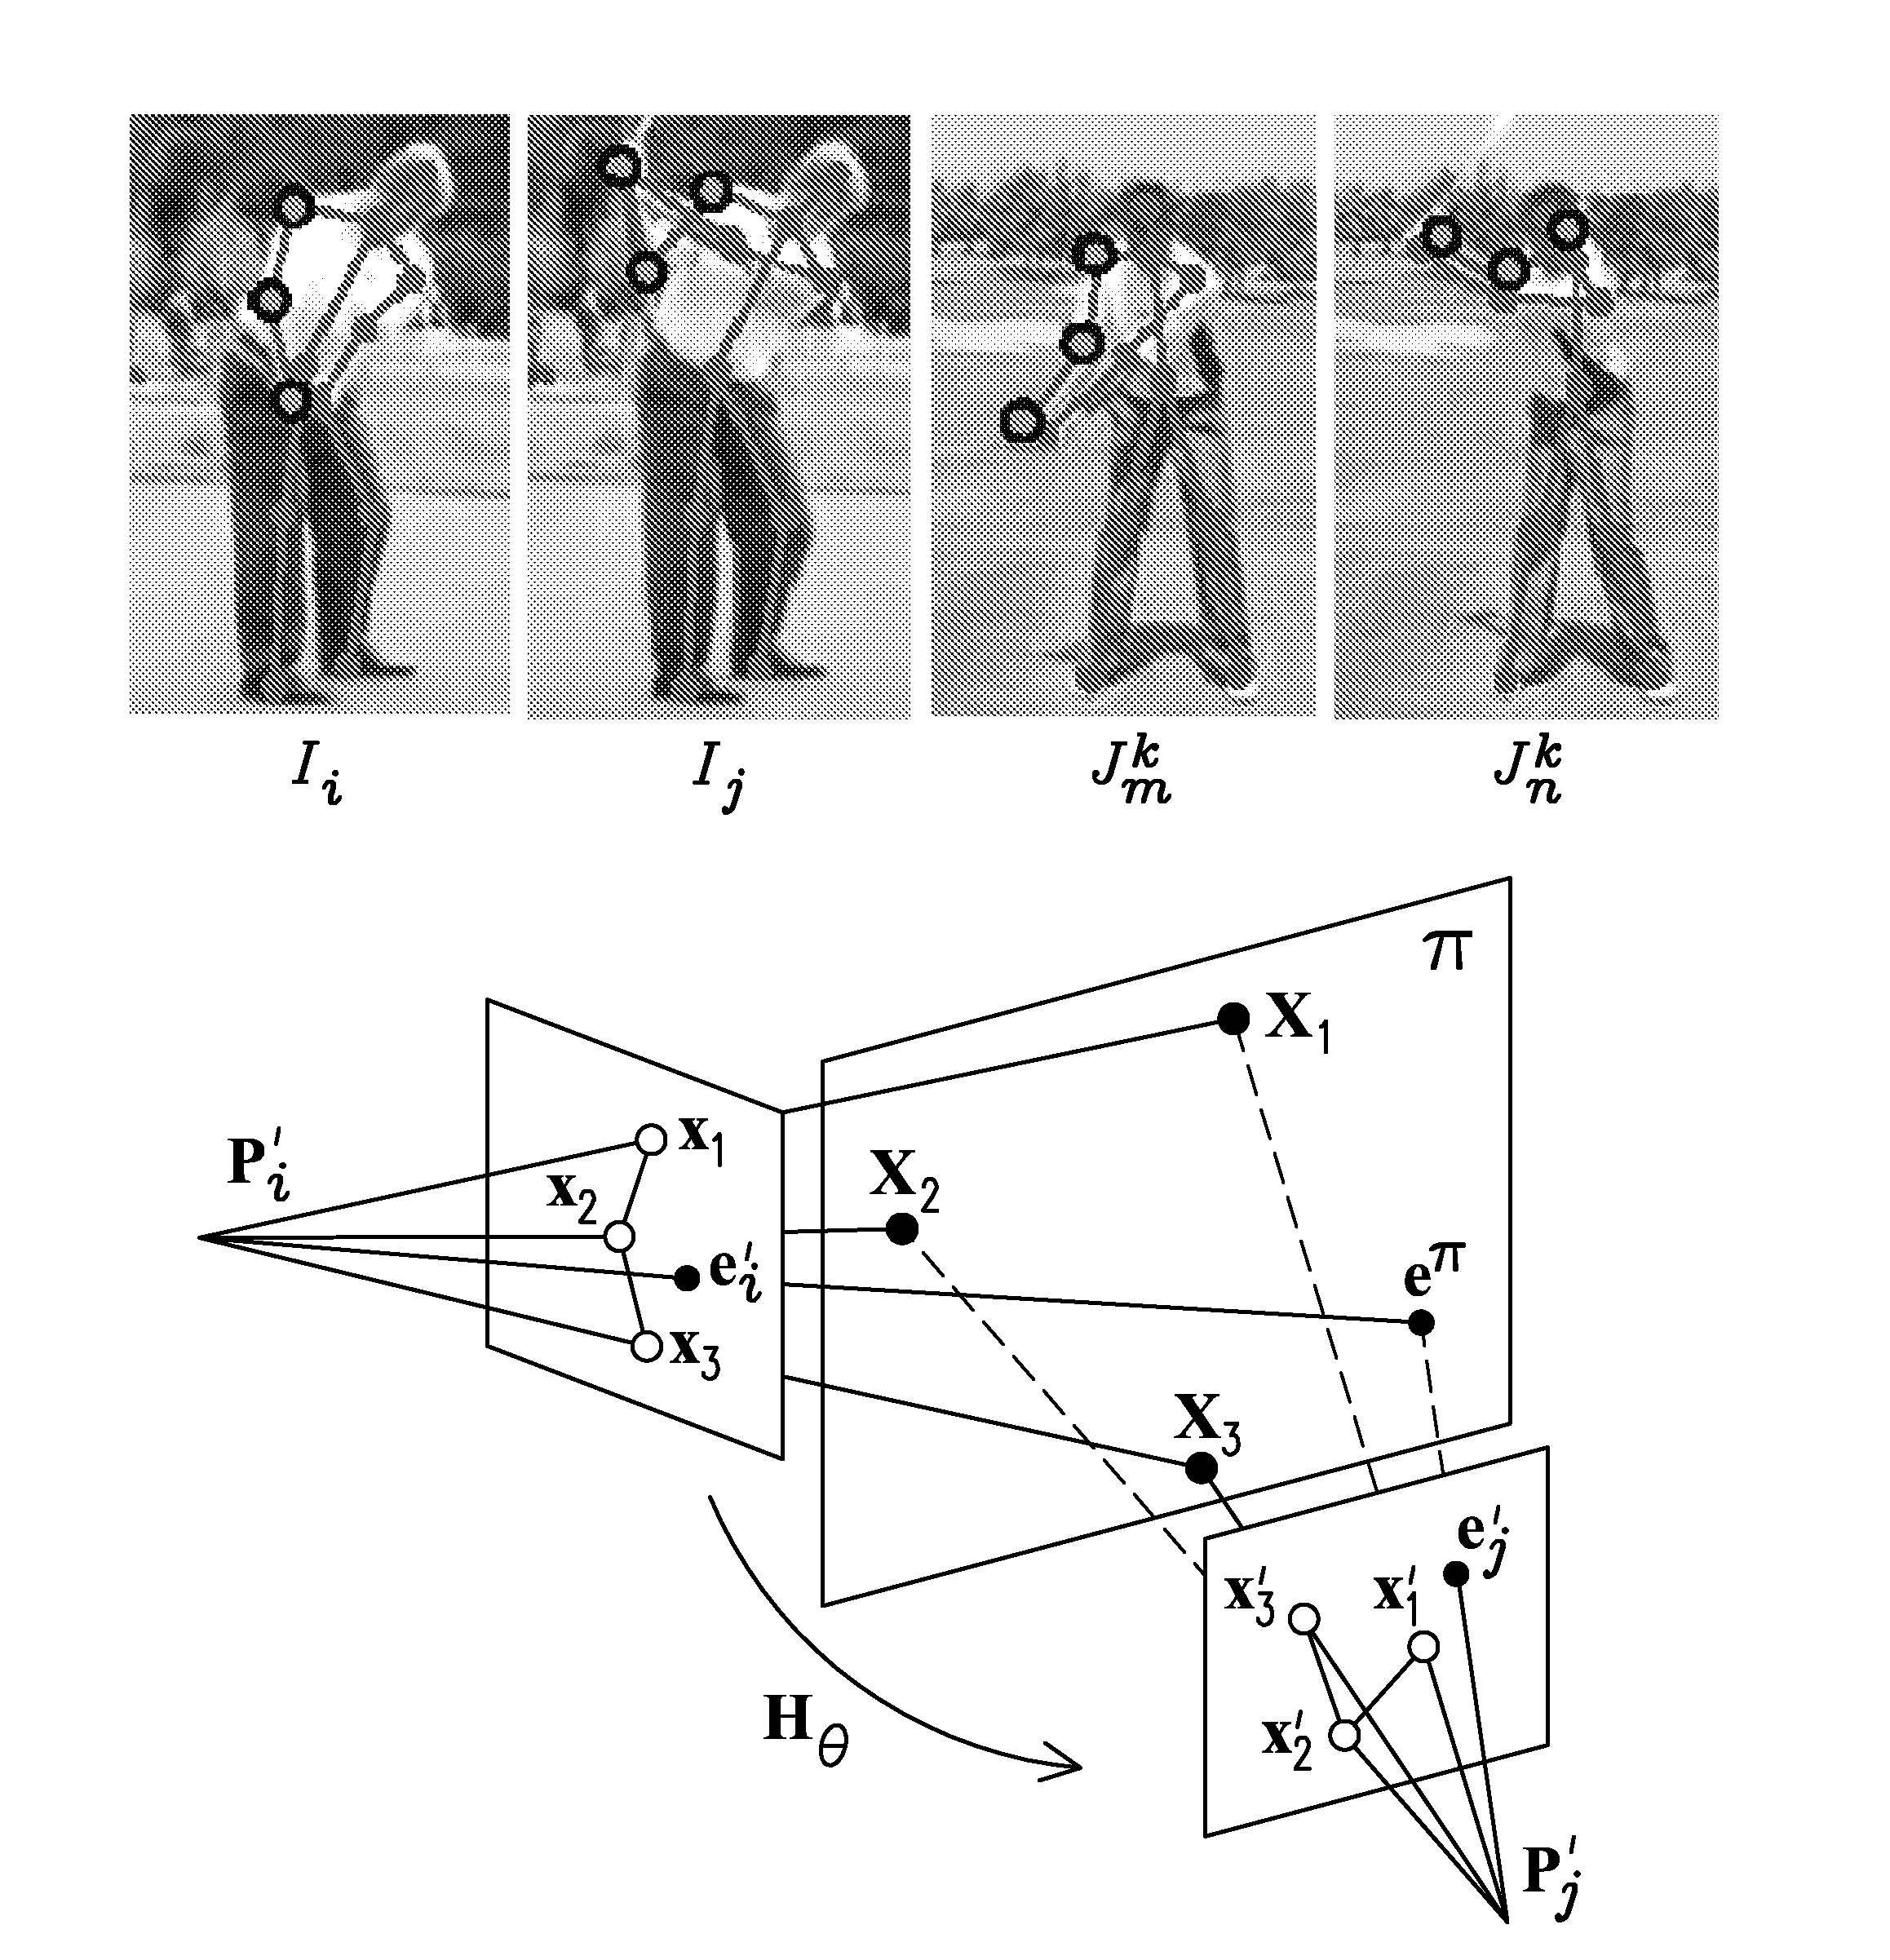 Methods for recognizing pose and action of articulated objects with collection of planes in motion